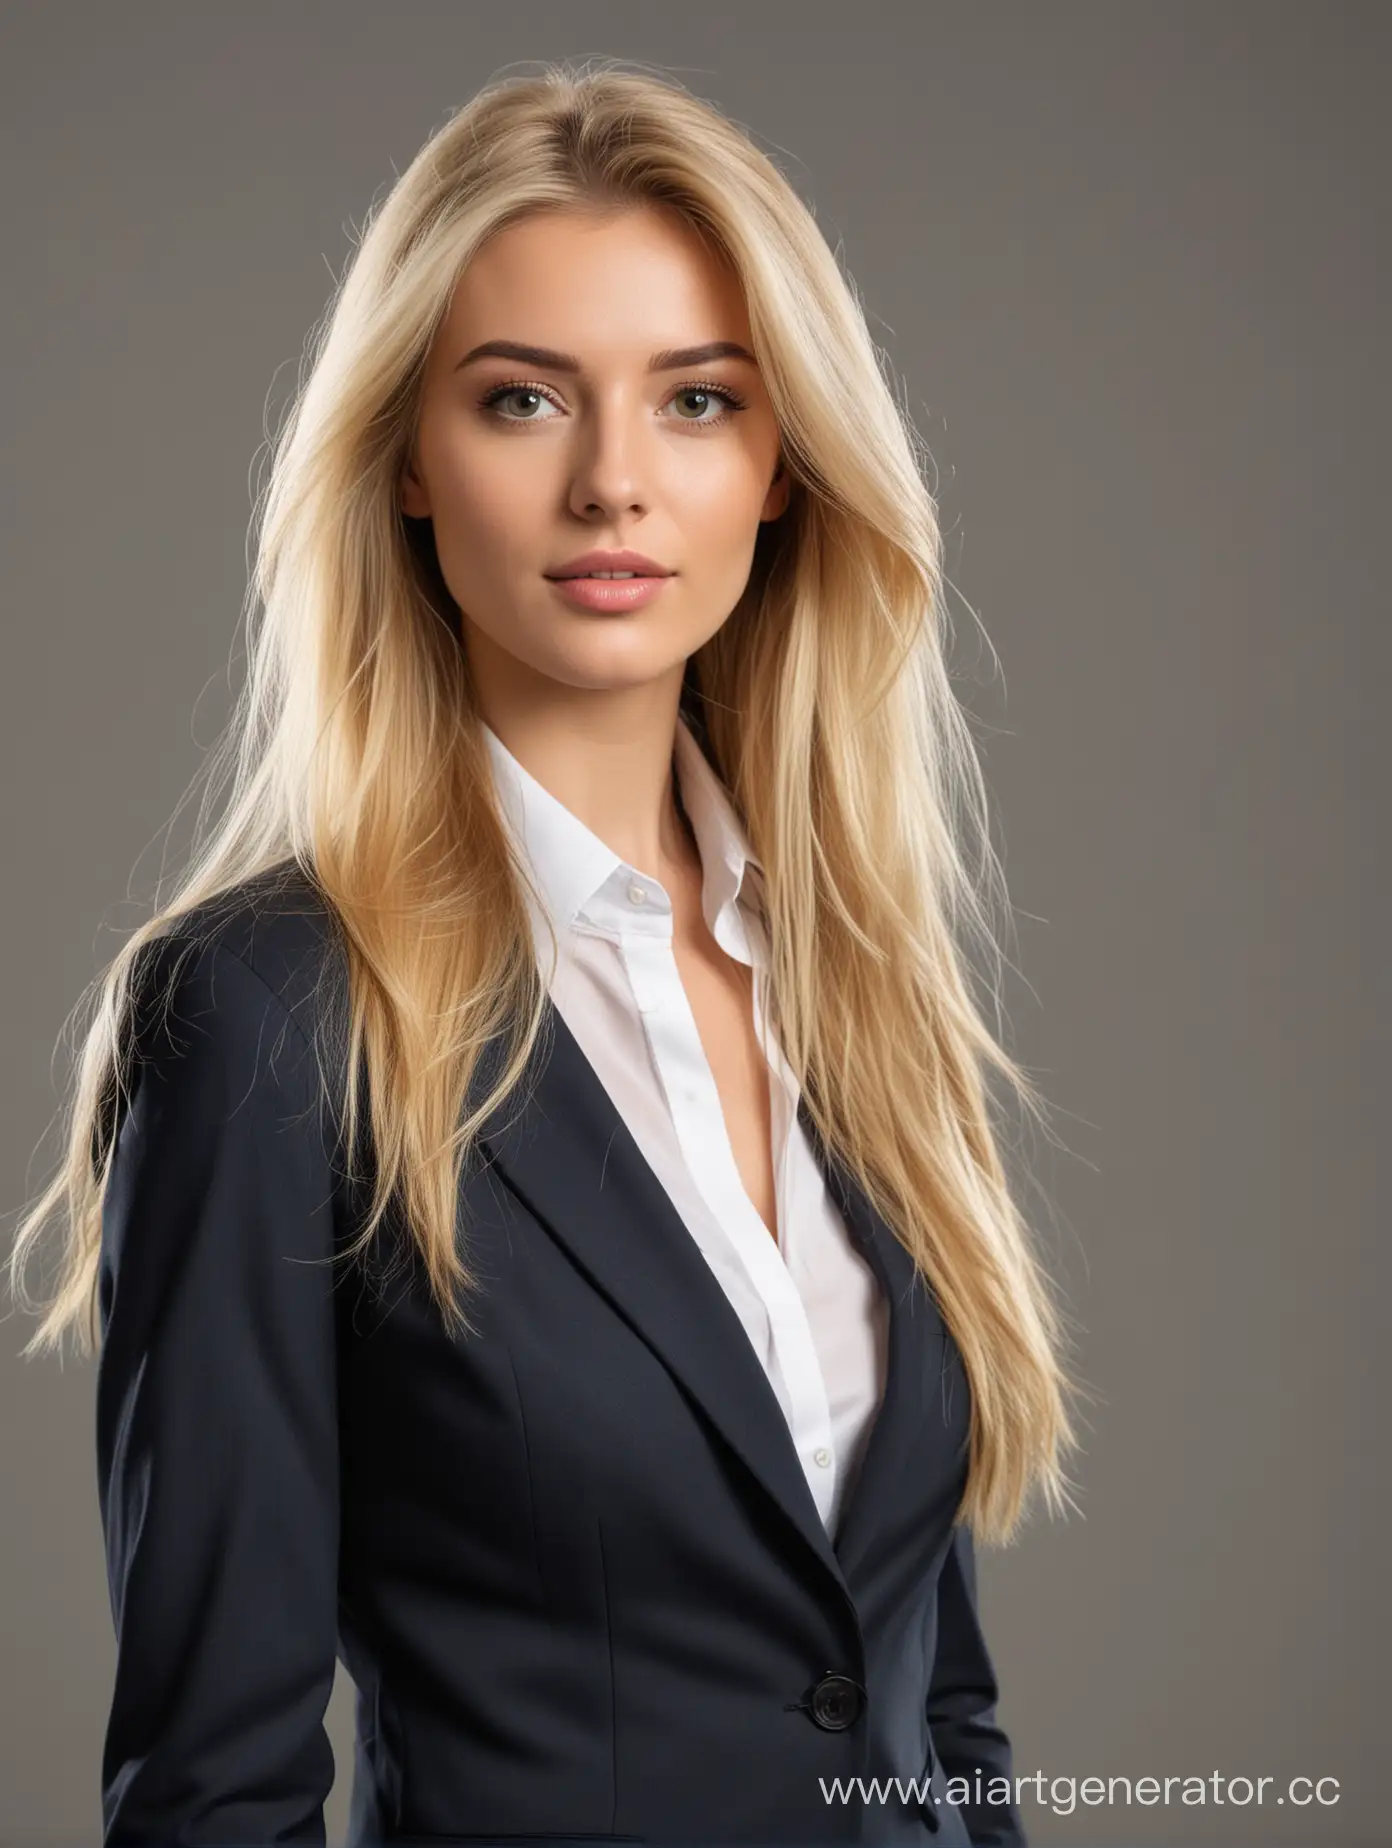 Professional-Blonde-Businesswoman-with-Elegant-Long-Hair